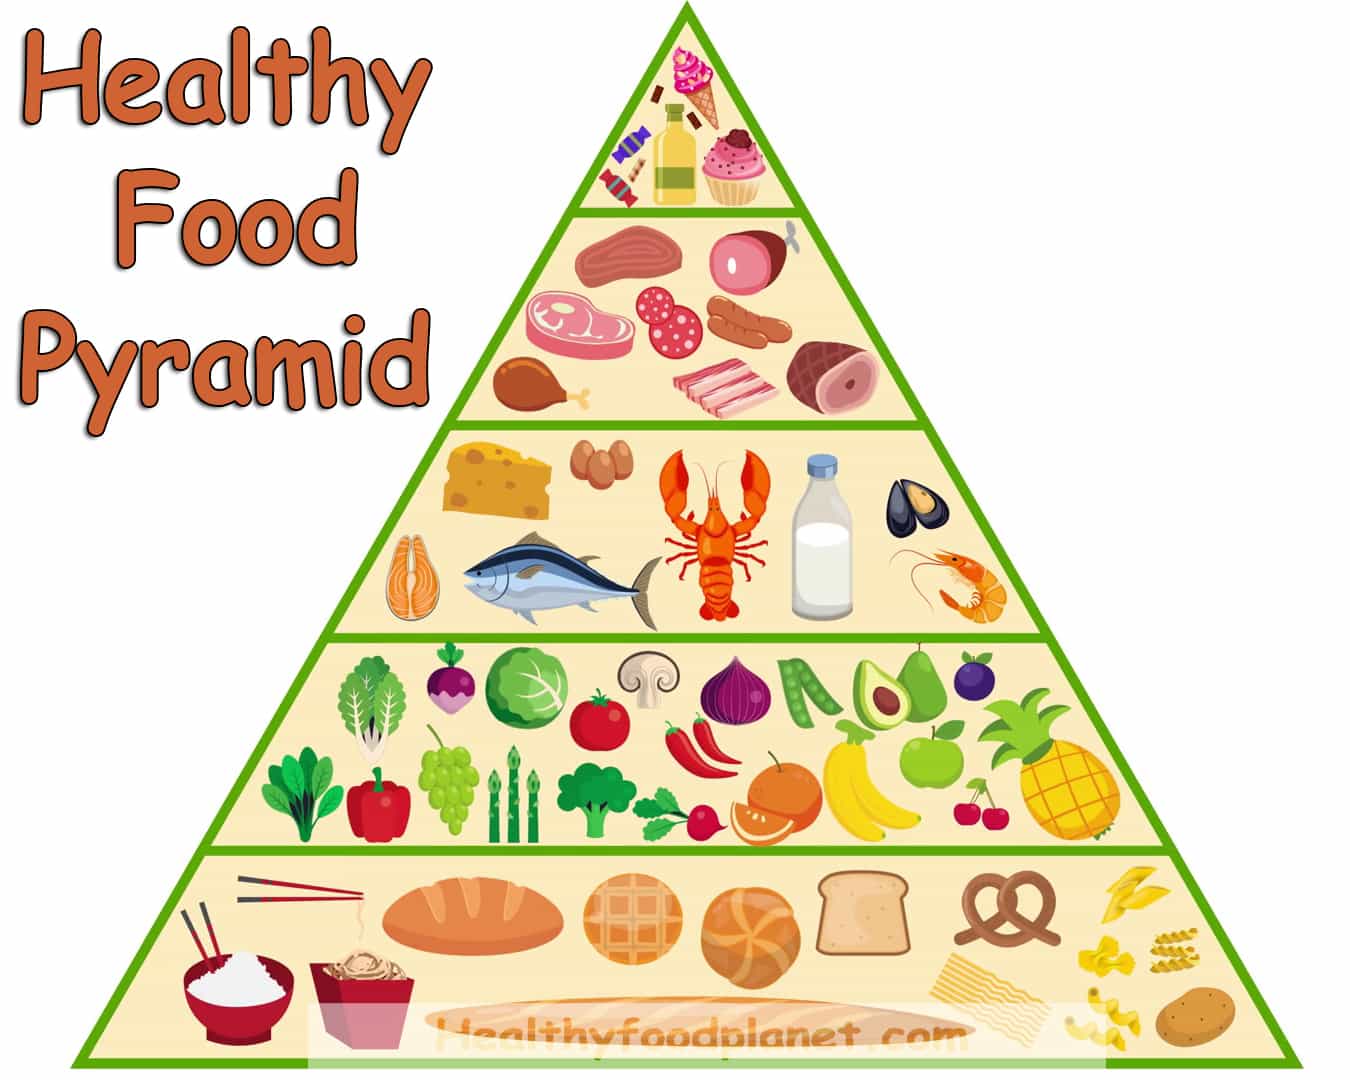 New healthy food pyramid for health – Healthy Food Planet